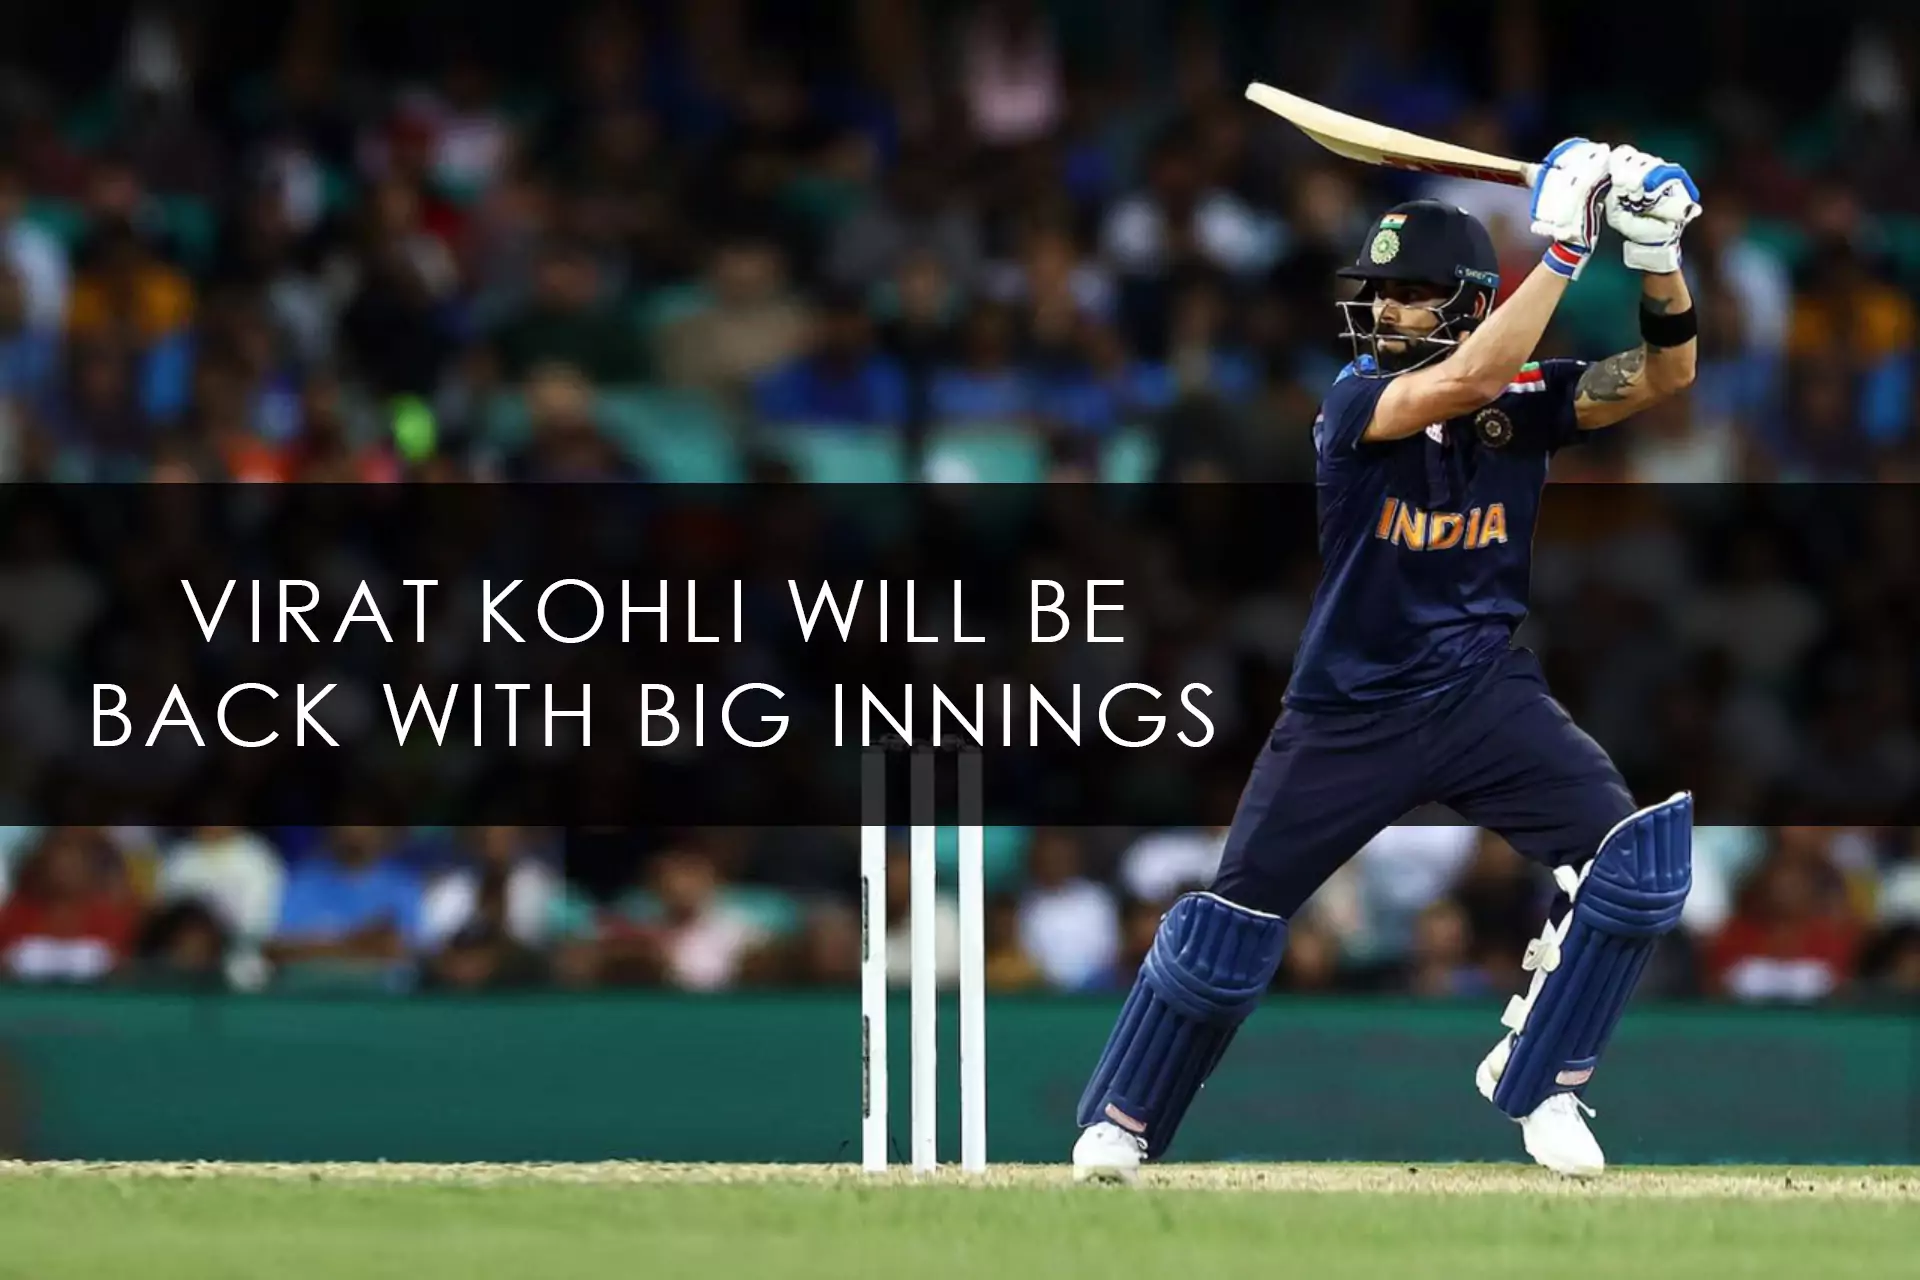 The childhood coach of Kohli thinks that Virat would be back with great innings in the match against England.